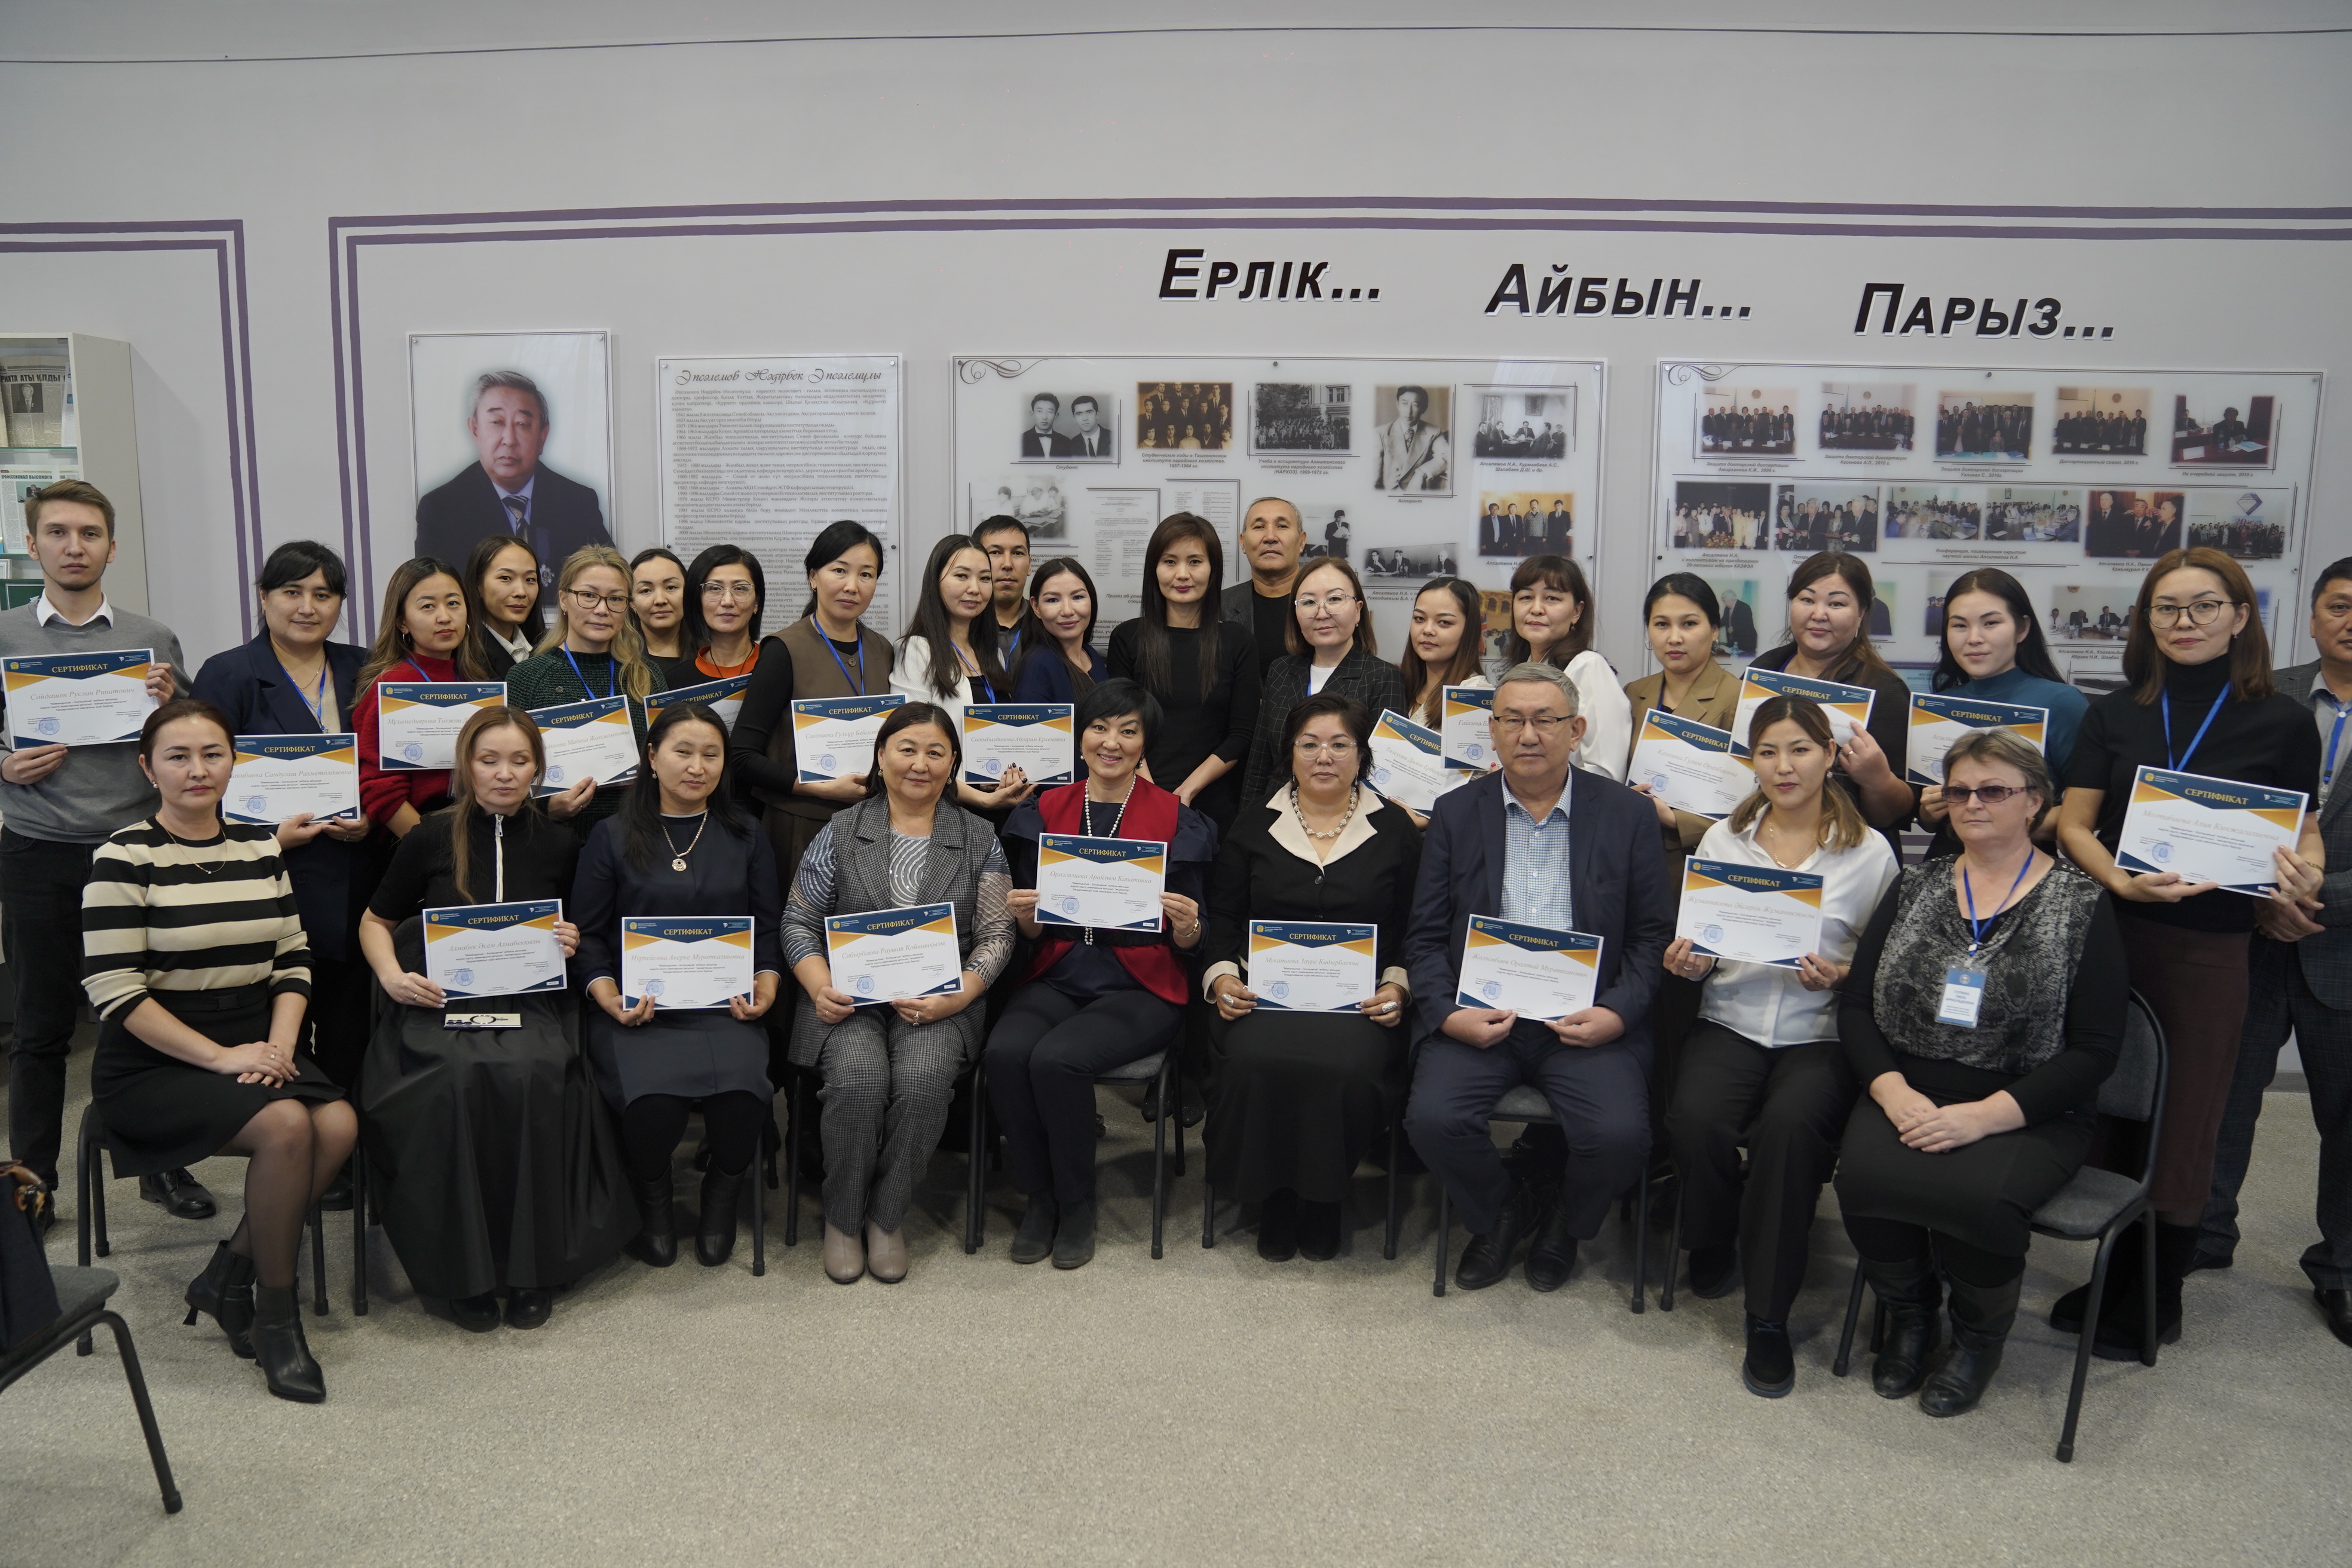 THE PROJECT "PROFESSION-THE FUTURE" HAS BEEN LAUNCHED IN THE ABAI REGION